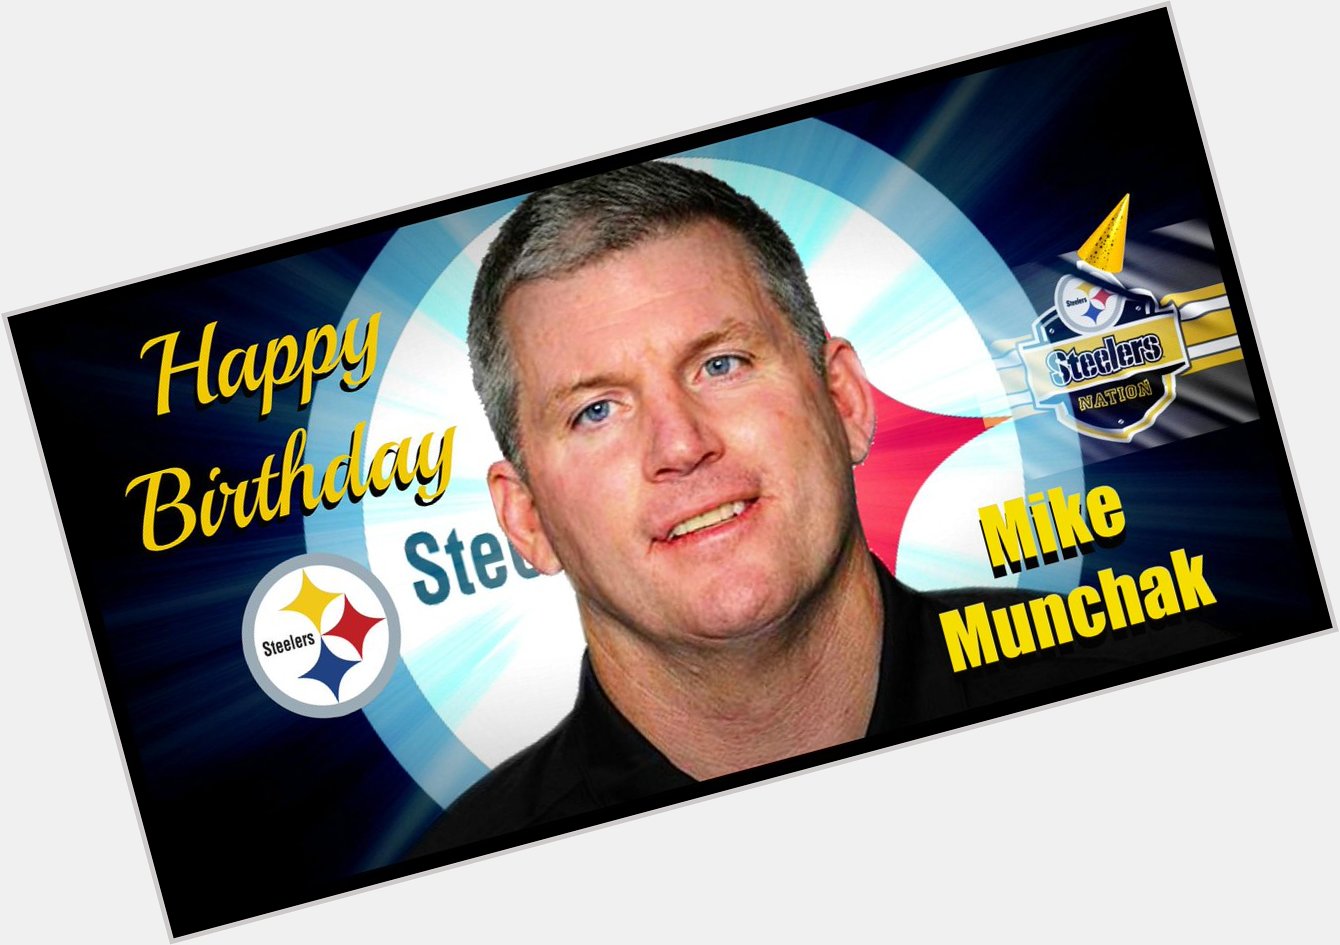 Wishing Pro Football Hall of Famer, Steelers OL coach Mike Munchak a Very Happy BDay!  